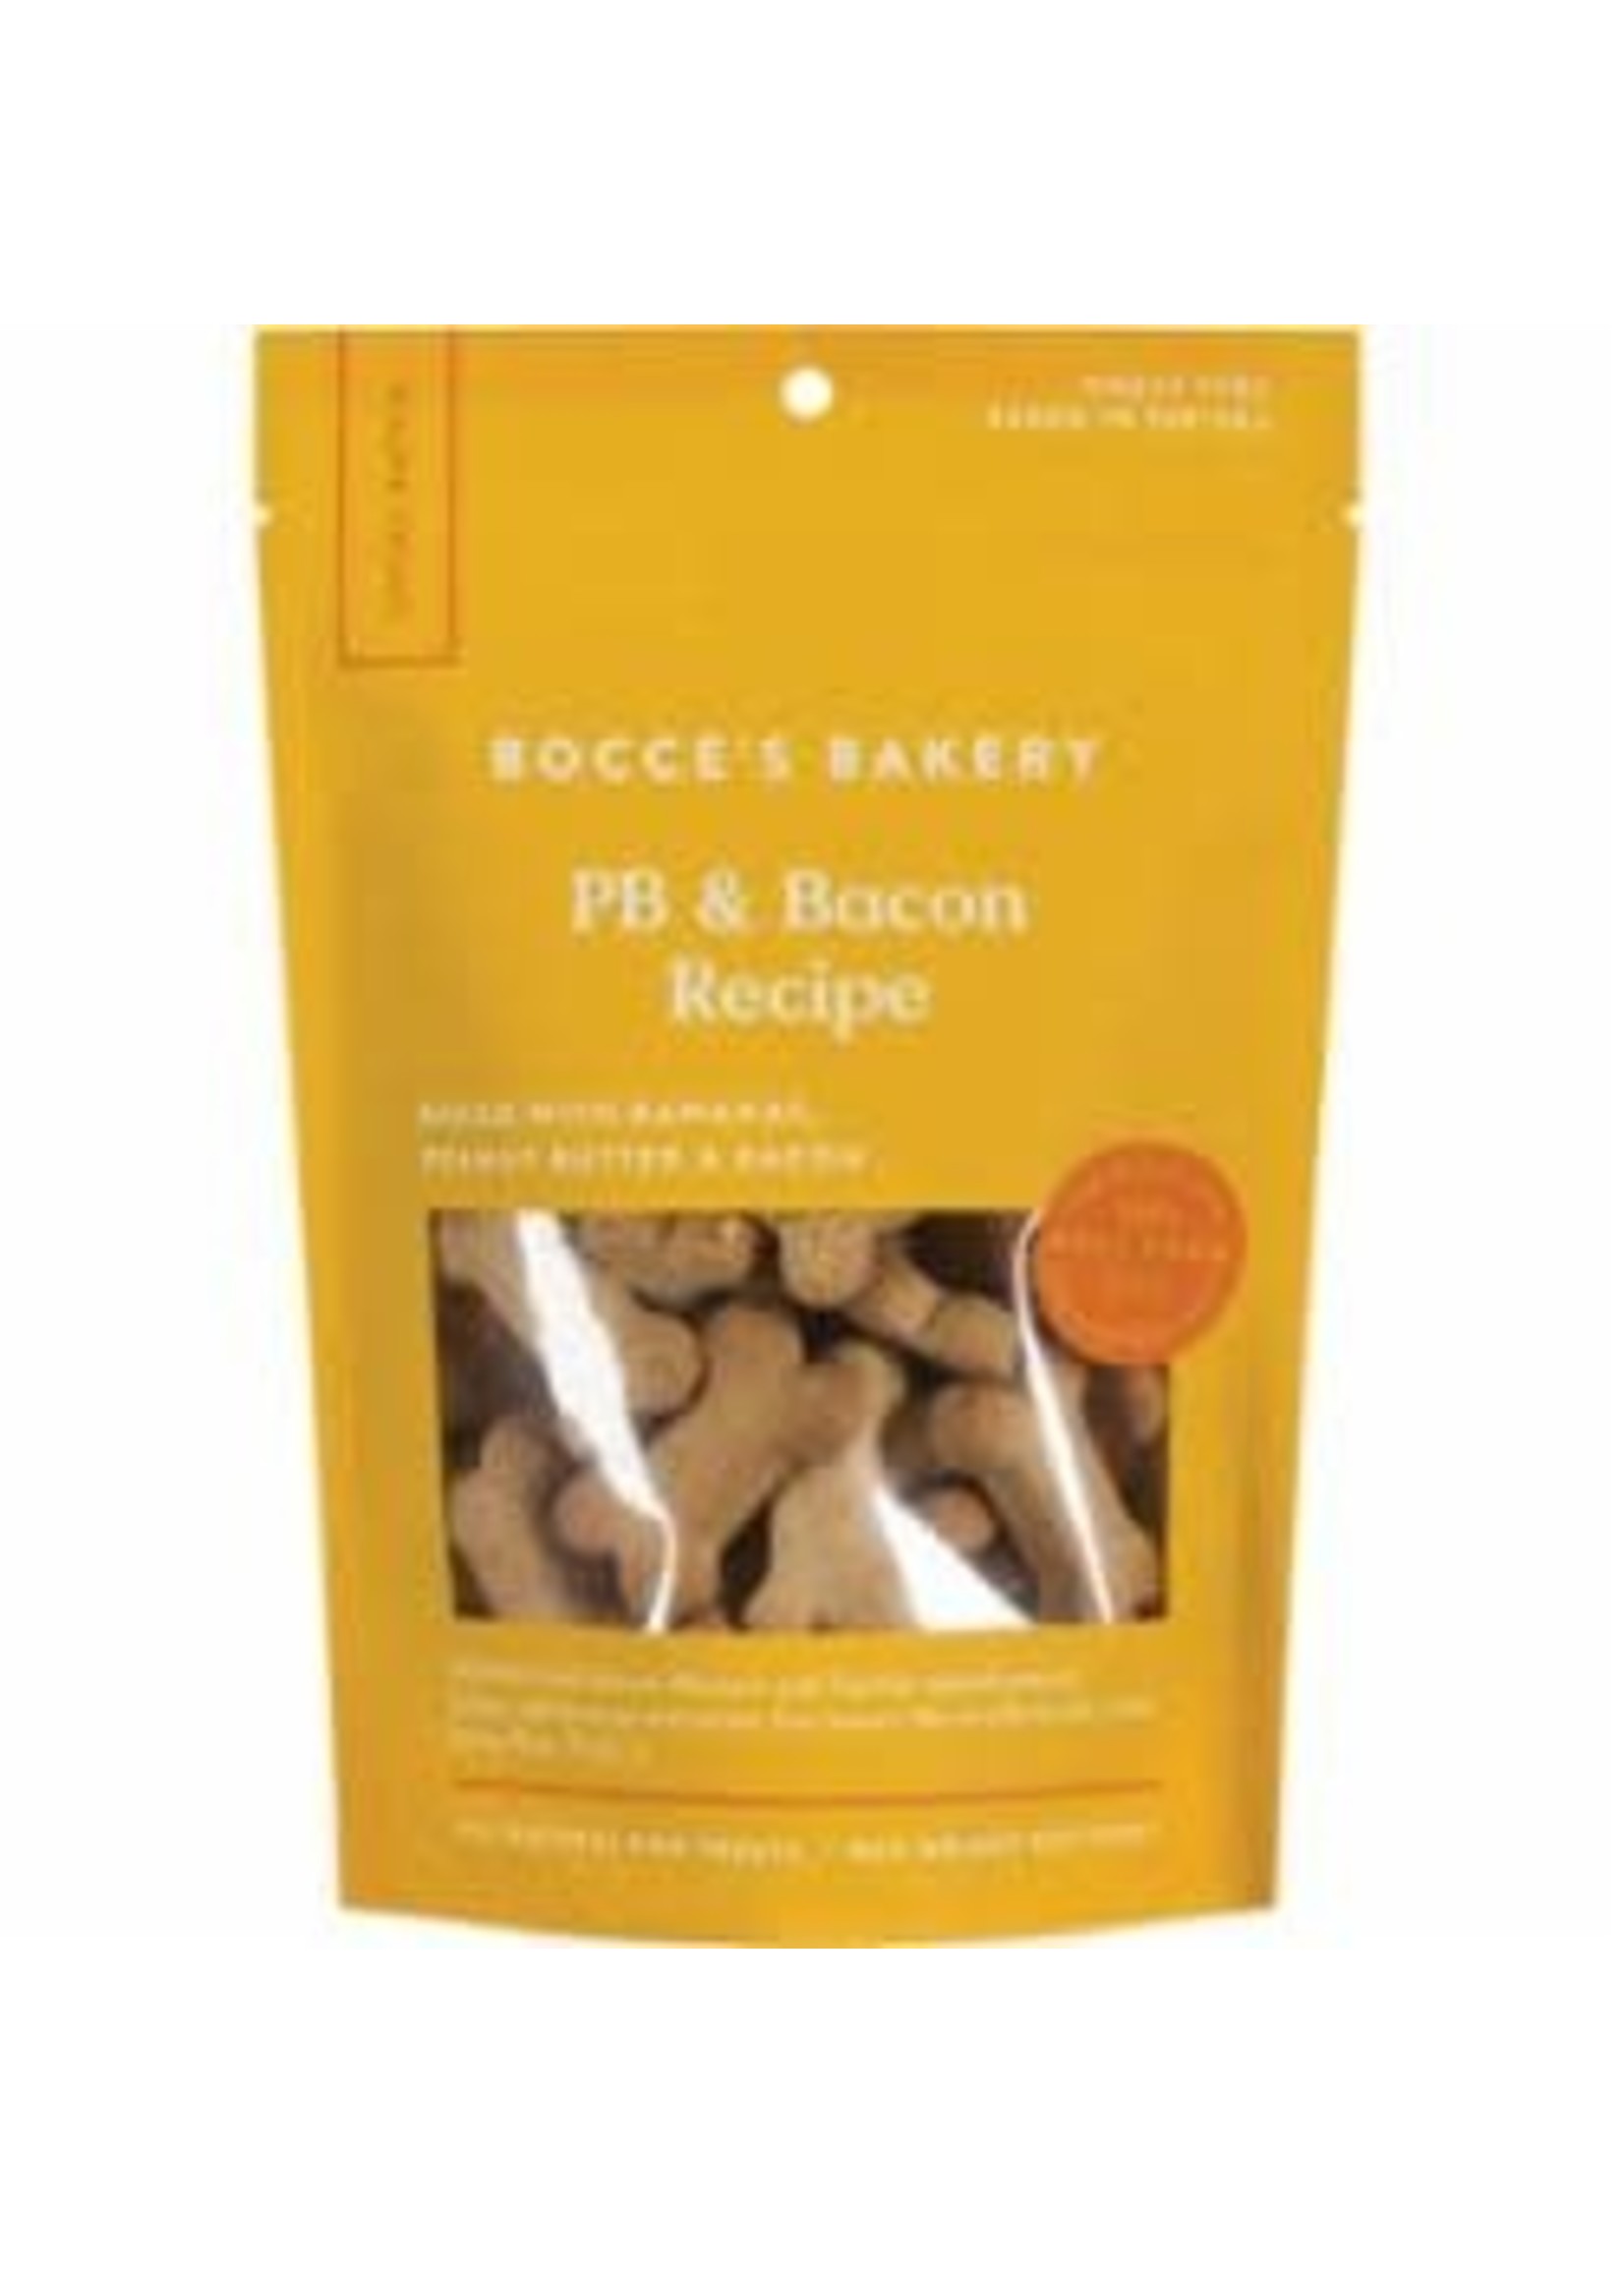 Bocce's Bakery PEANUT BUTTER BACON BISCUITS 8OZ